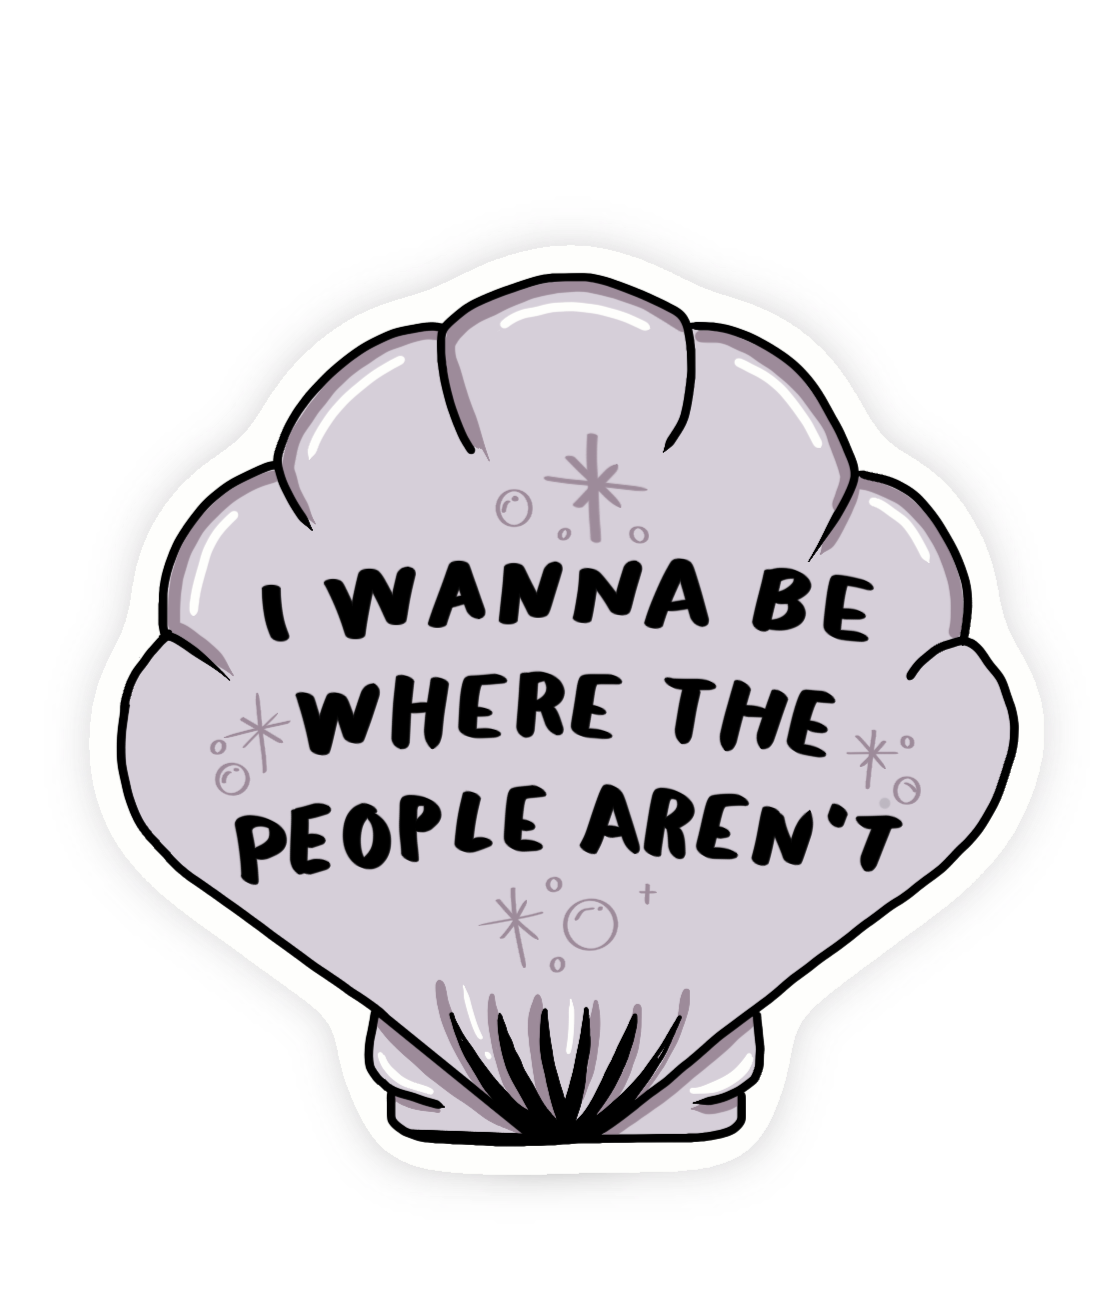 I wanna be where the people aren't vinyl sticker